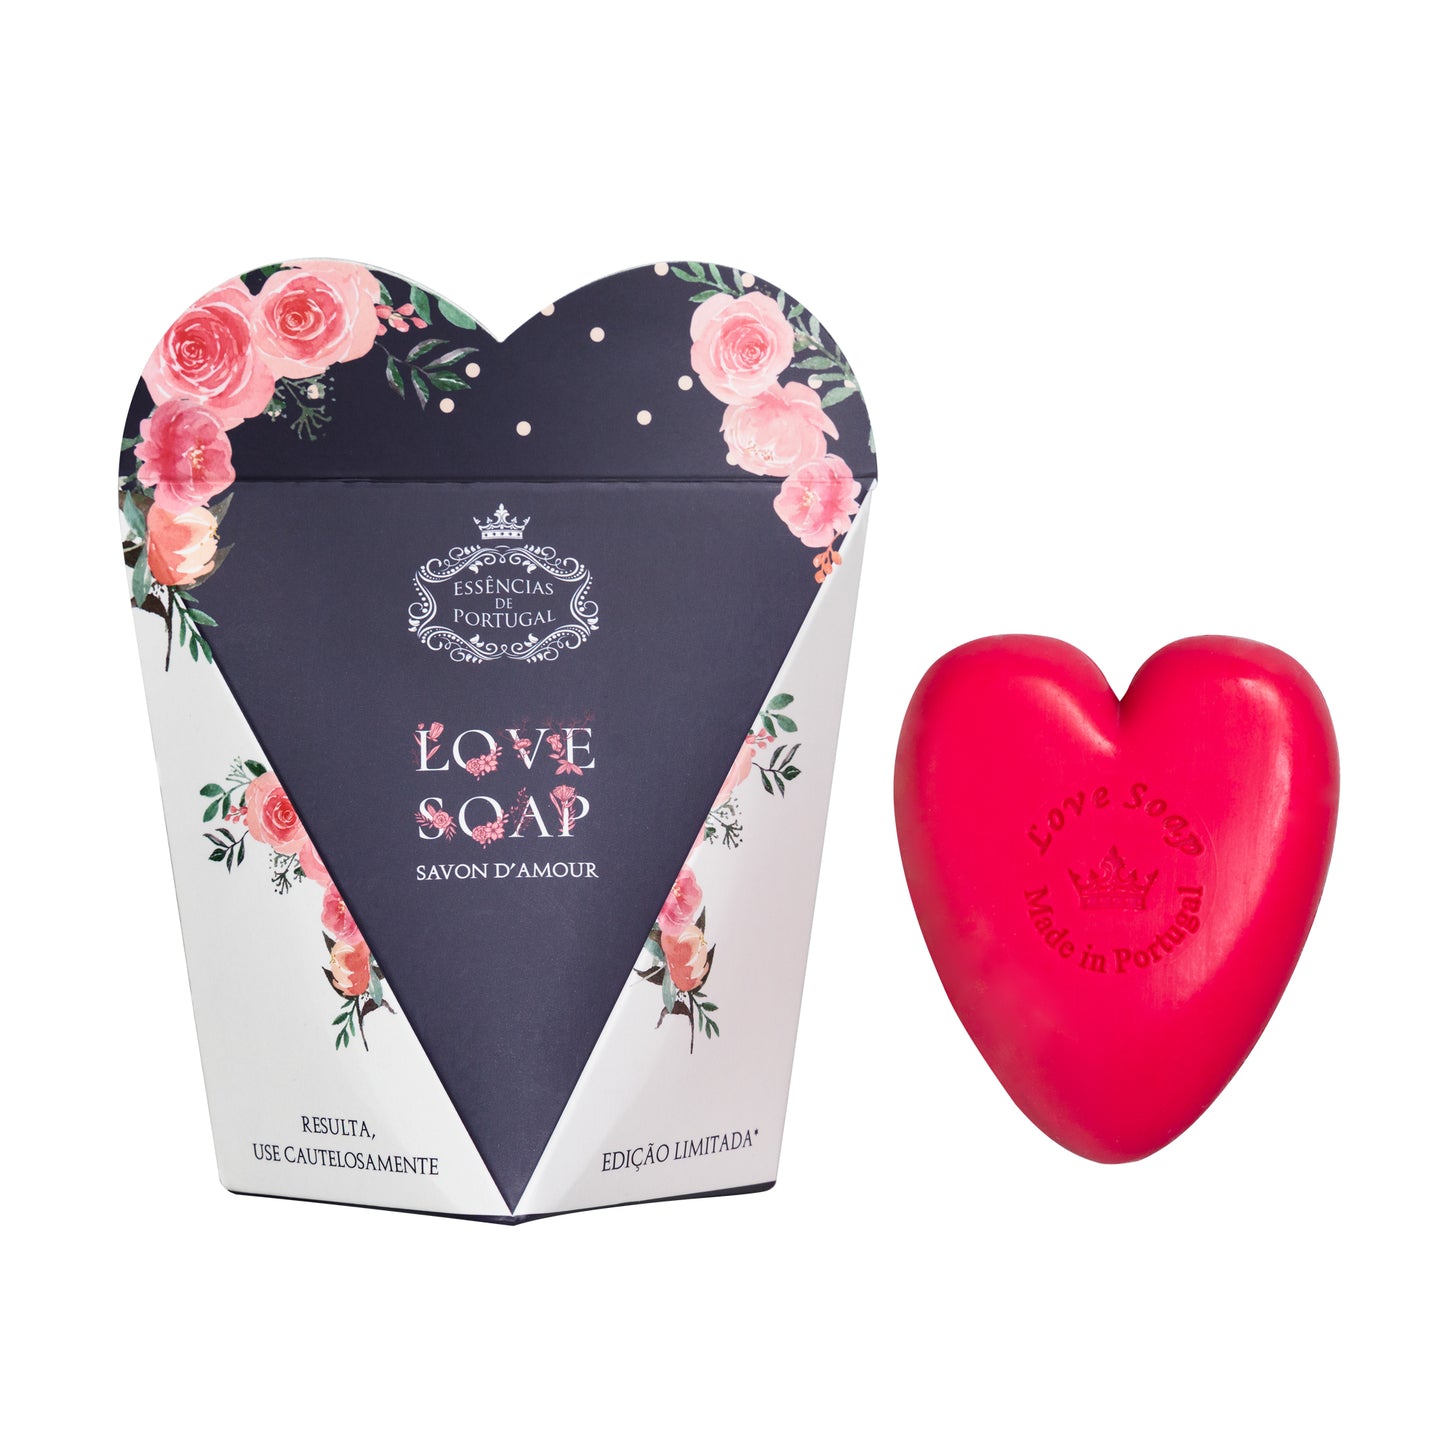 Primary image of Rose Love Soap